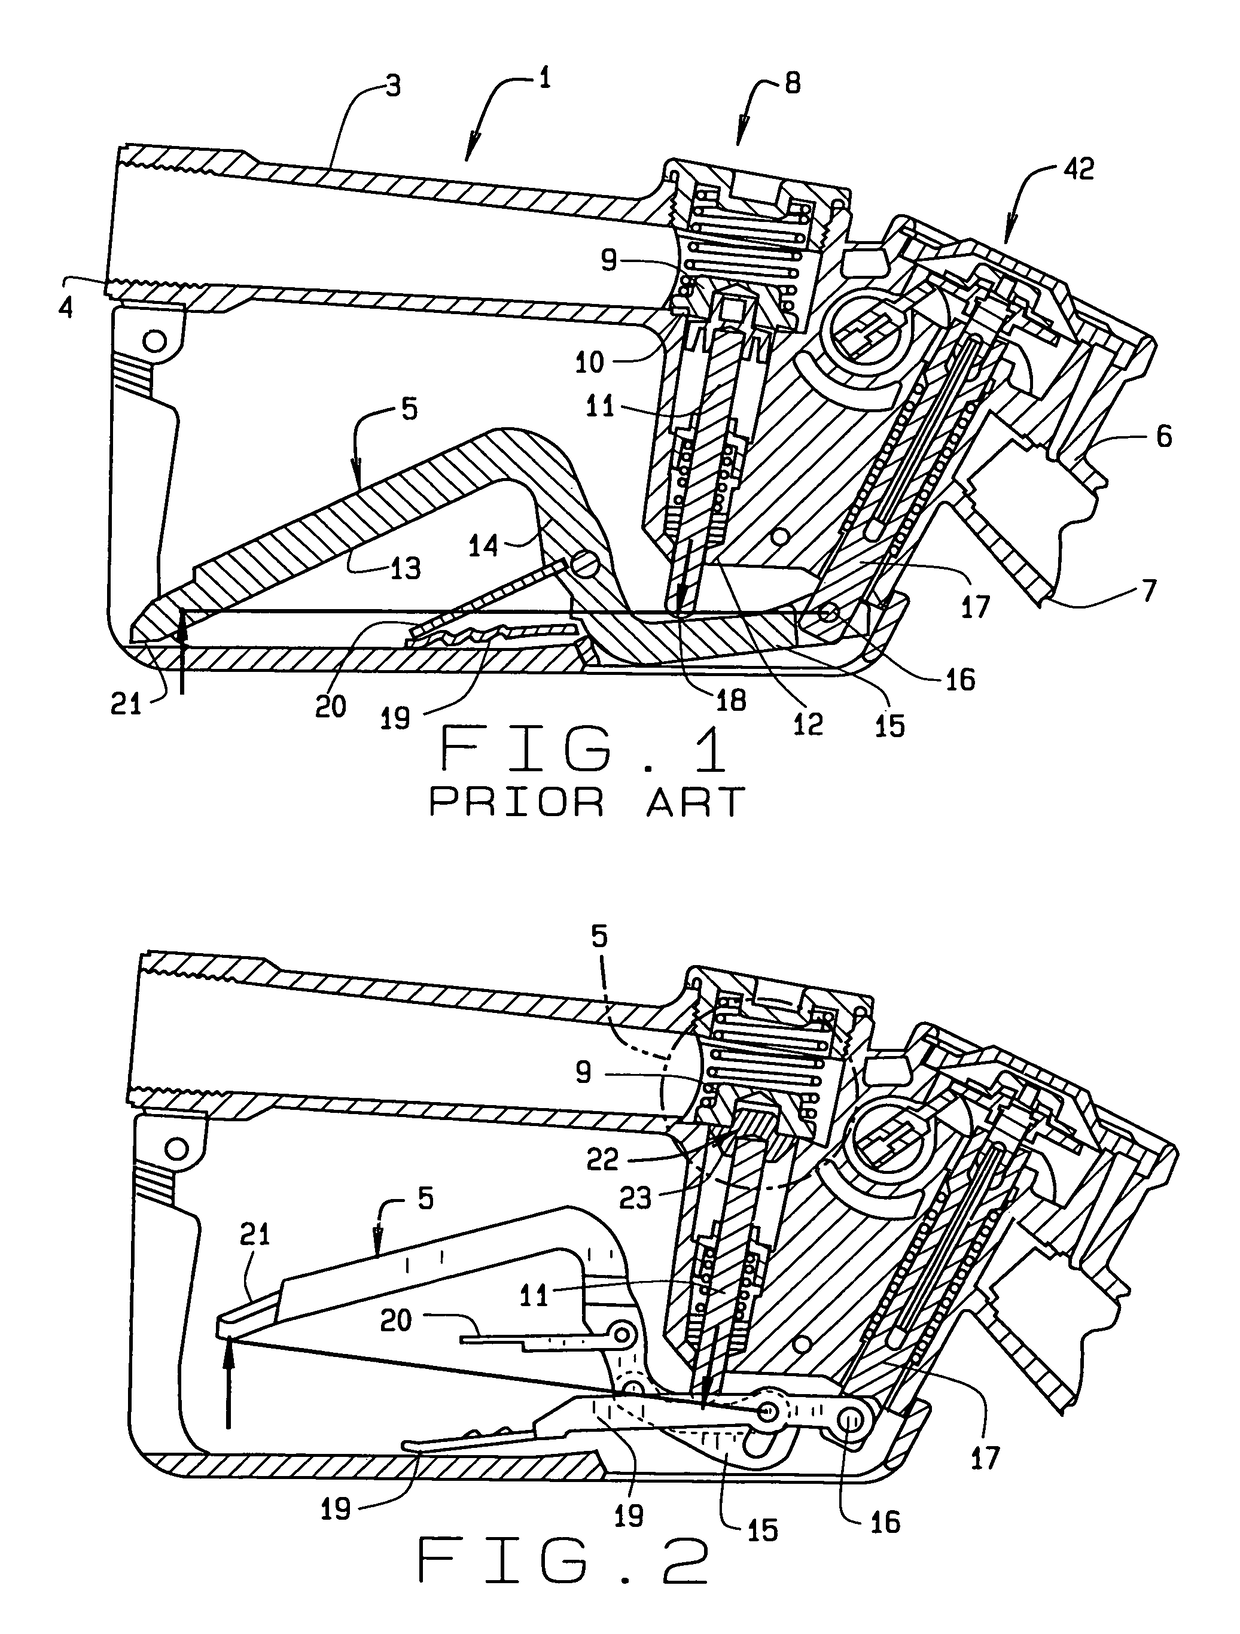 Nozzle construction to facilitate its opening and enhance the flow of fuel through the nozzle